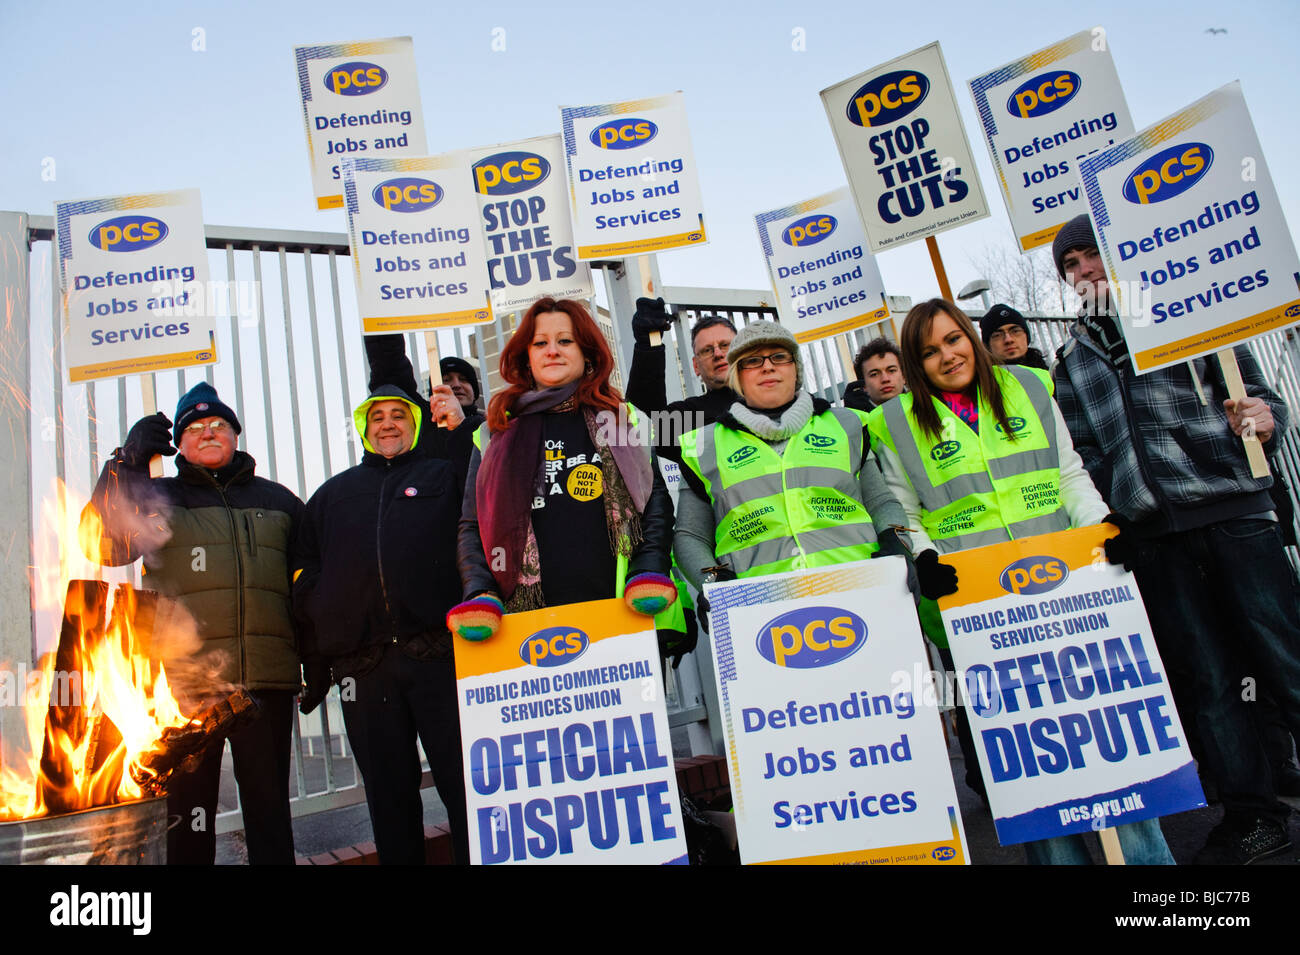 PCS [Public and Commercial Services] union members on strike, picketing welsh civil service offices, Cardiff, March 8 2010. Stock Photo